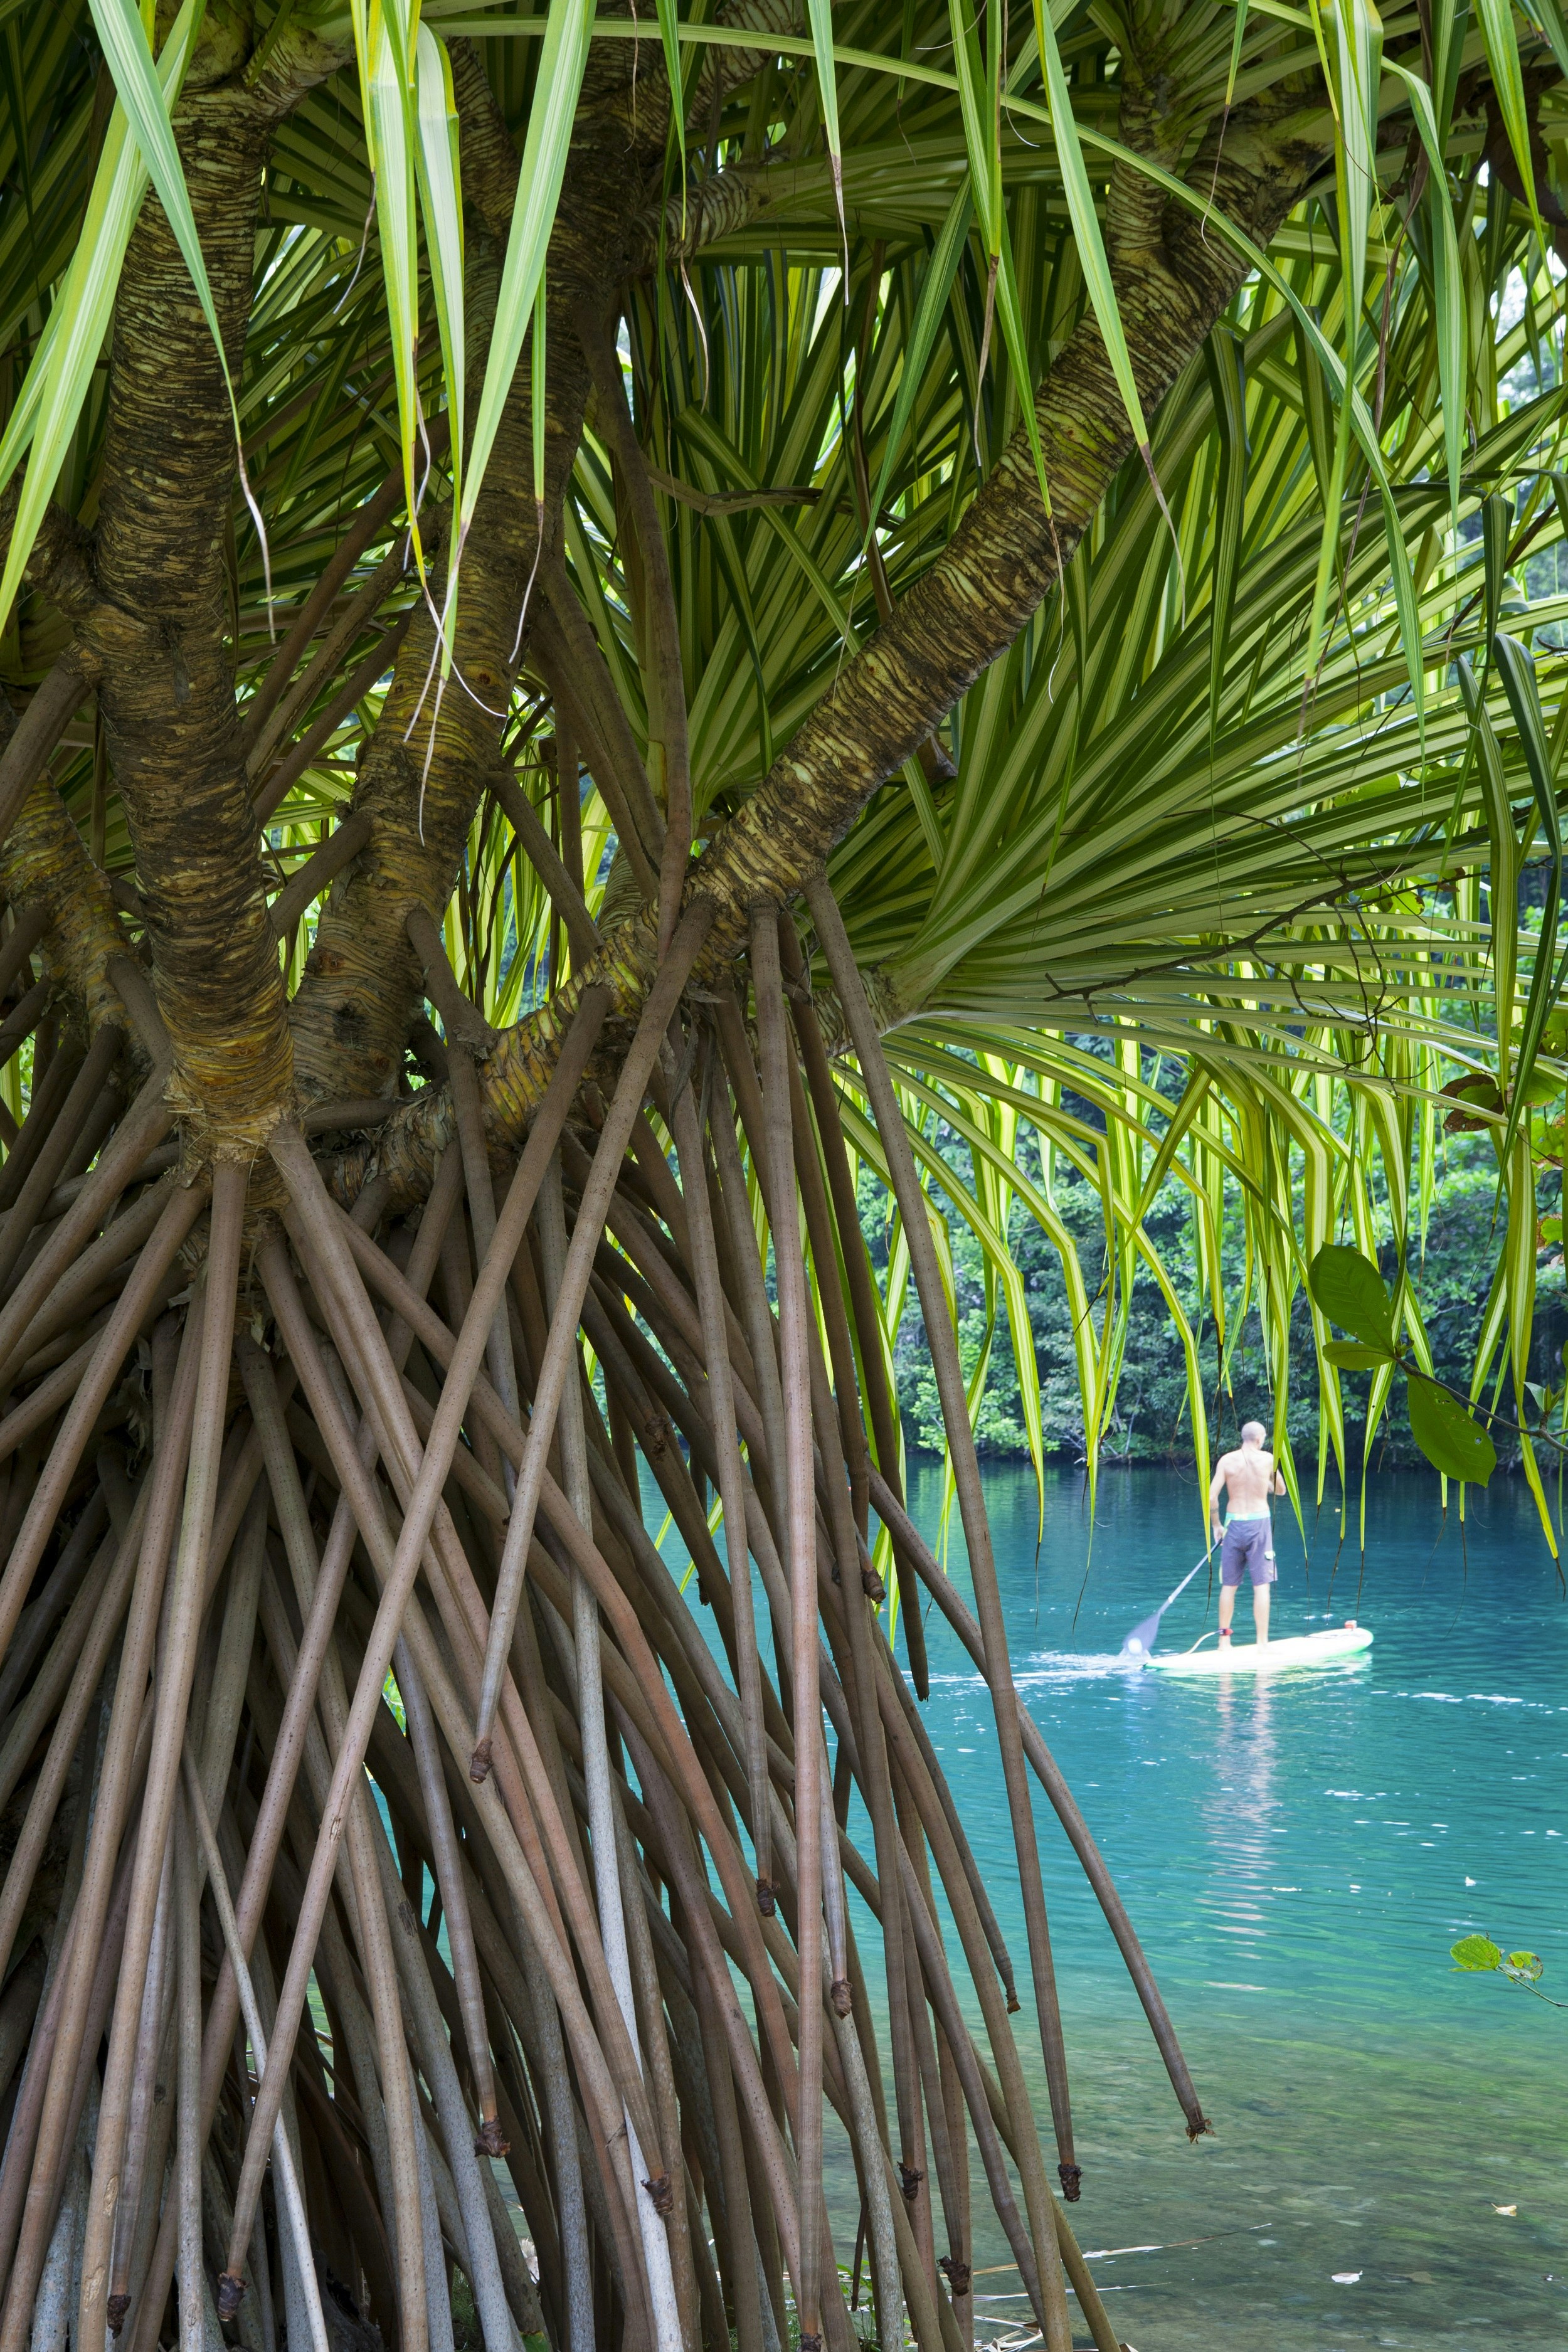 A man in a swimsuit paddling a stand-up paddle board in the Blue Lagoon.